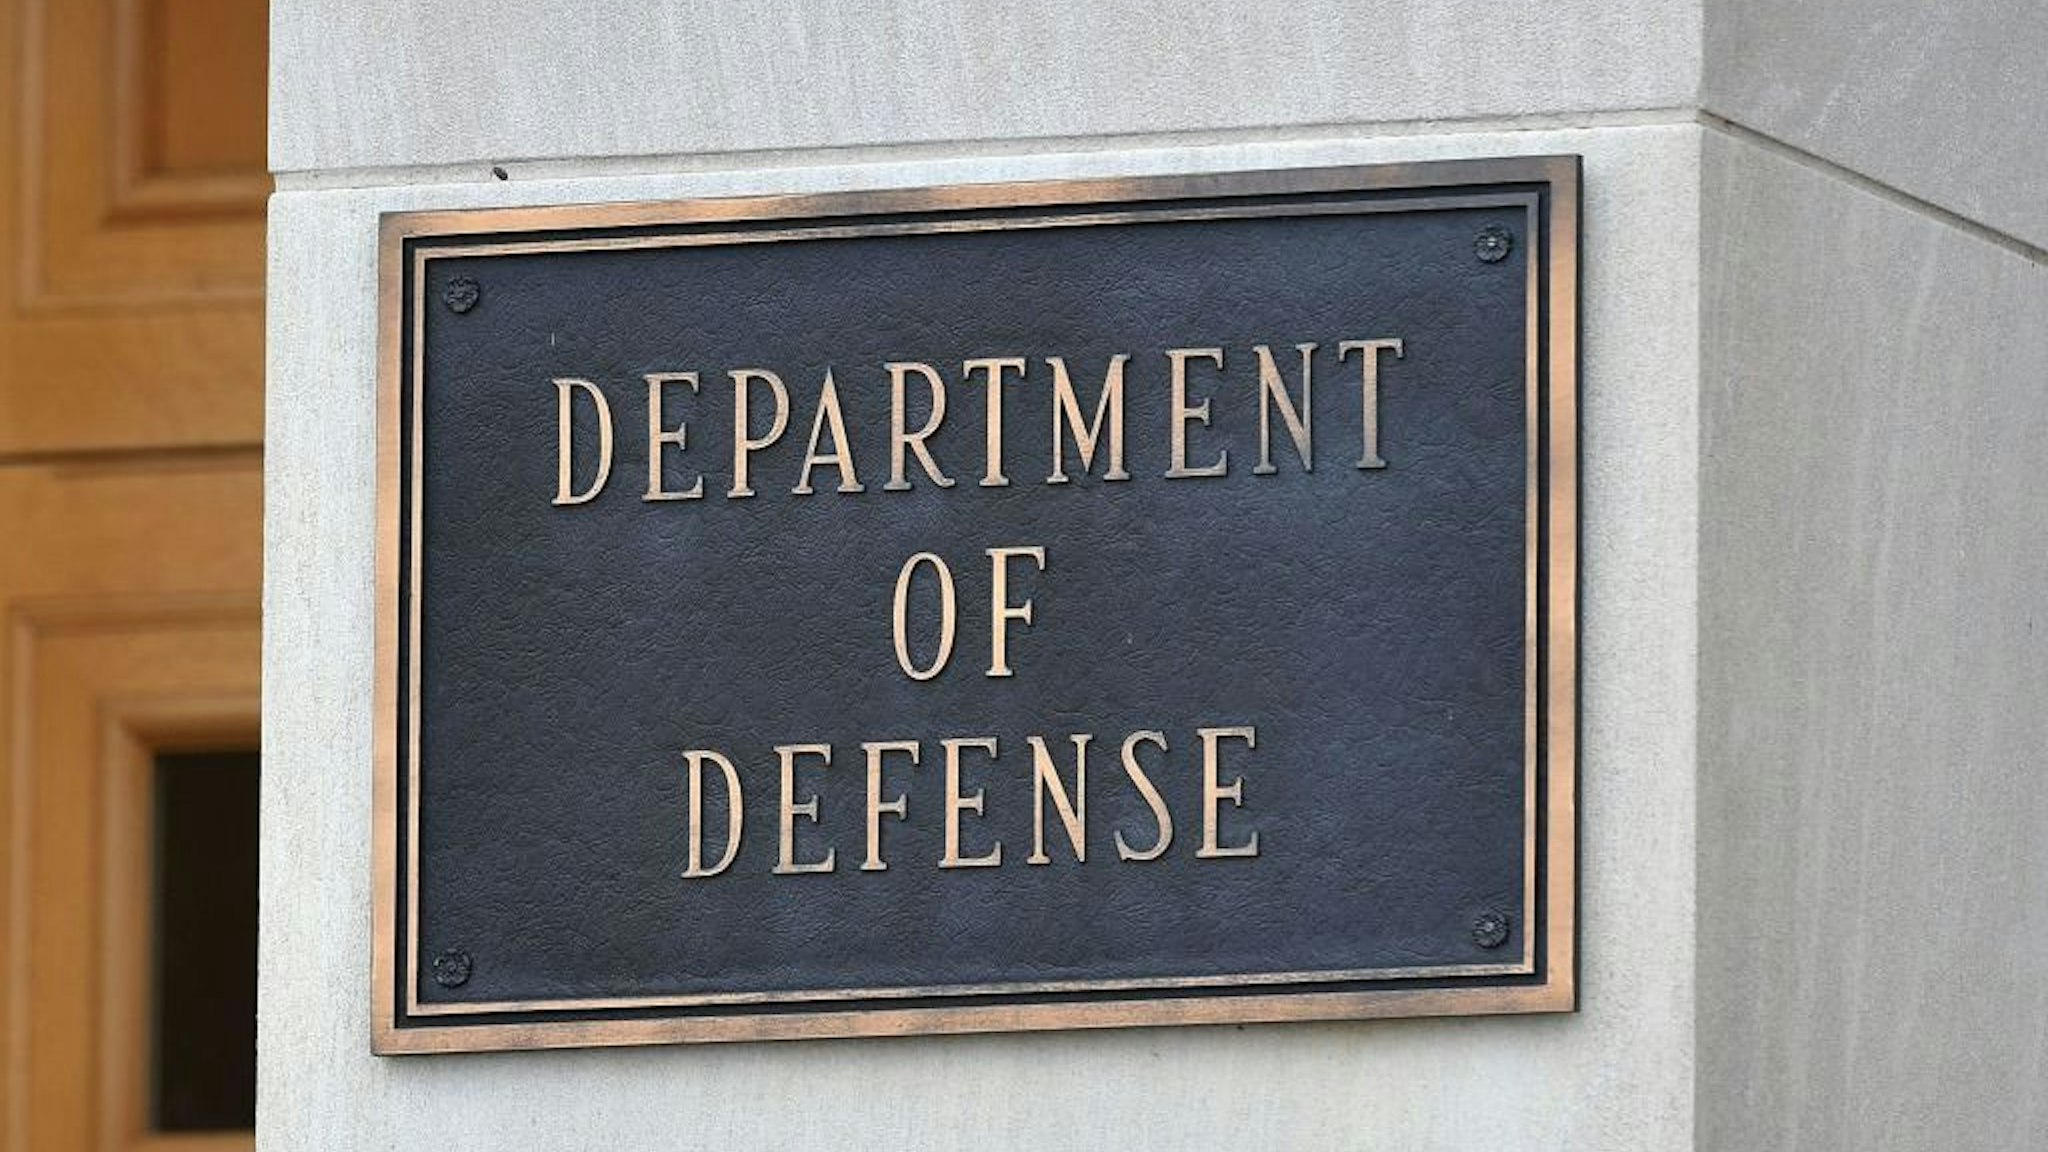 A Department of Defense plaque is seen outside the Pentagon in Washington, DC on October 6, 2021. (Photo by MANDEL NGAN / AFP) (Photo by MANDEL NGAN/AFP via Getty Images)